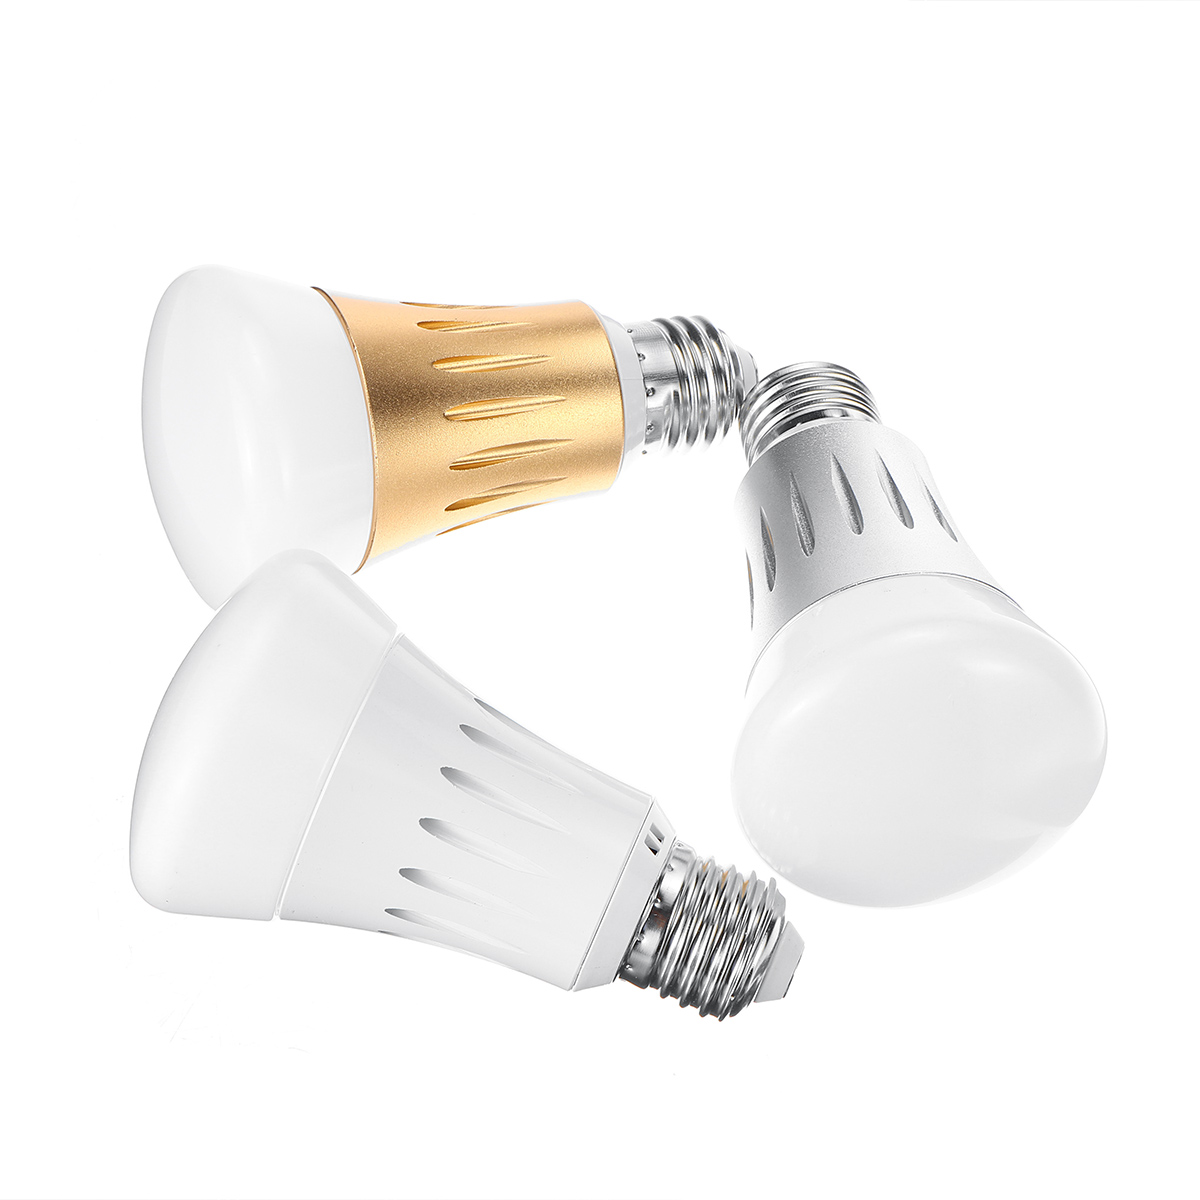 Find Wifi Smart Light Bulb 11W E27 RGBW Lamp For Google Home / Alexa / Amazon House for Sale on Gipsybee.com with cryptocurrencies